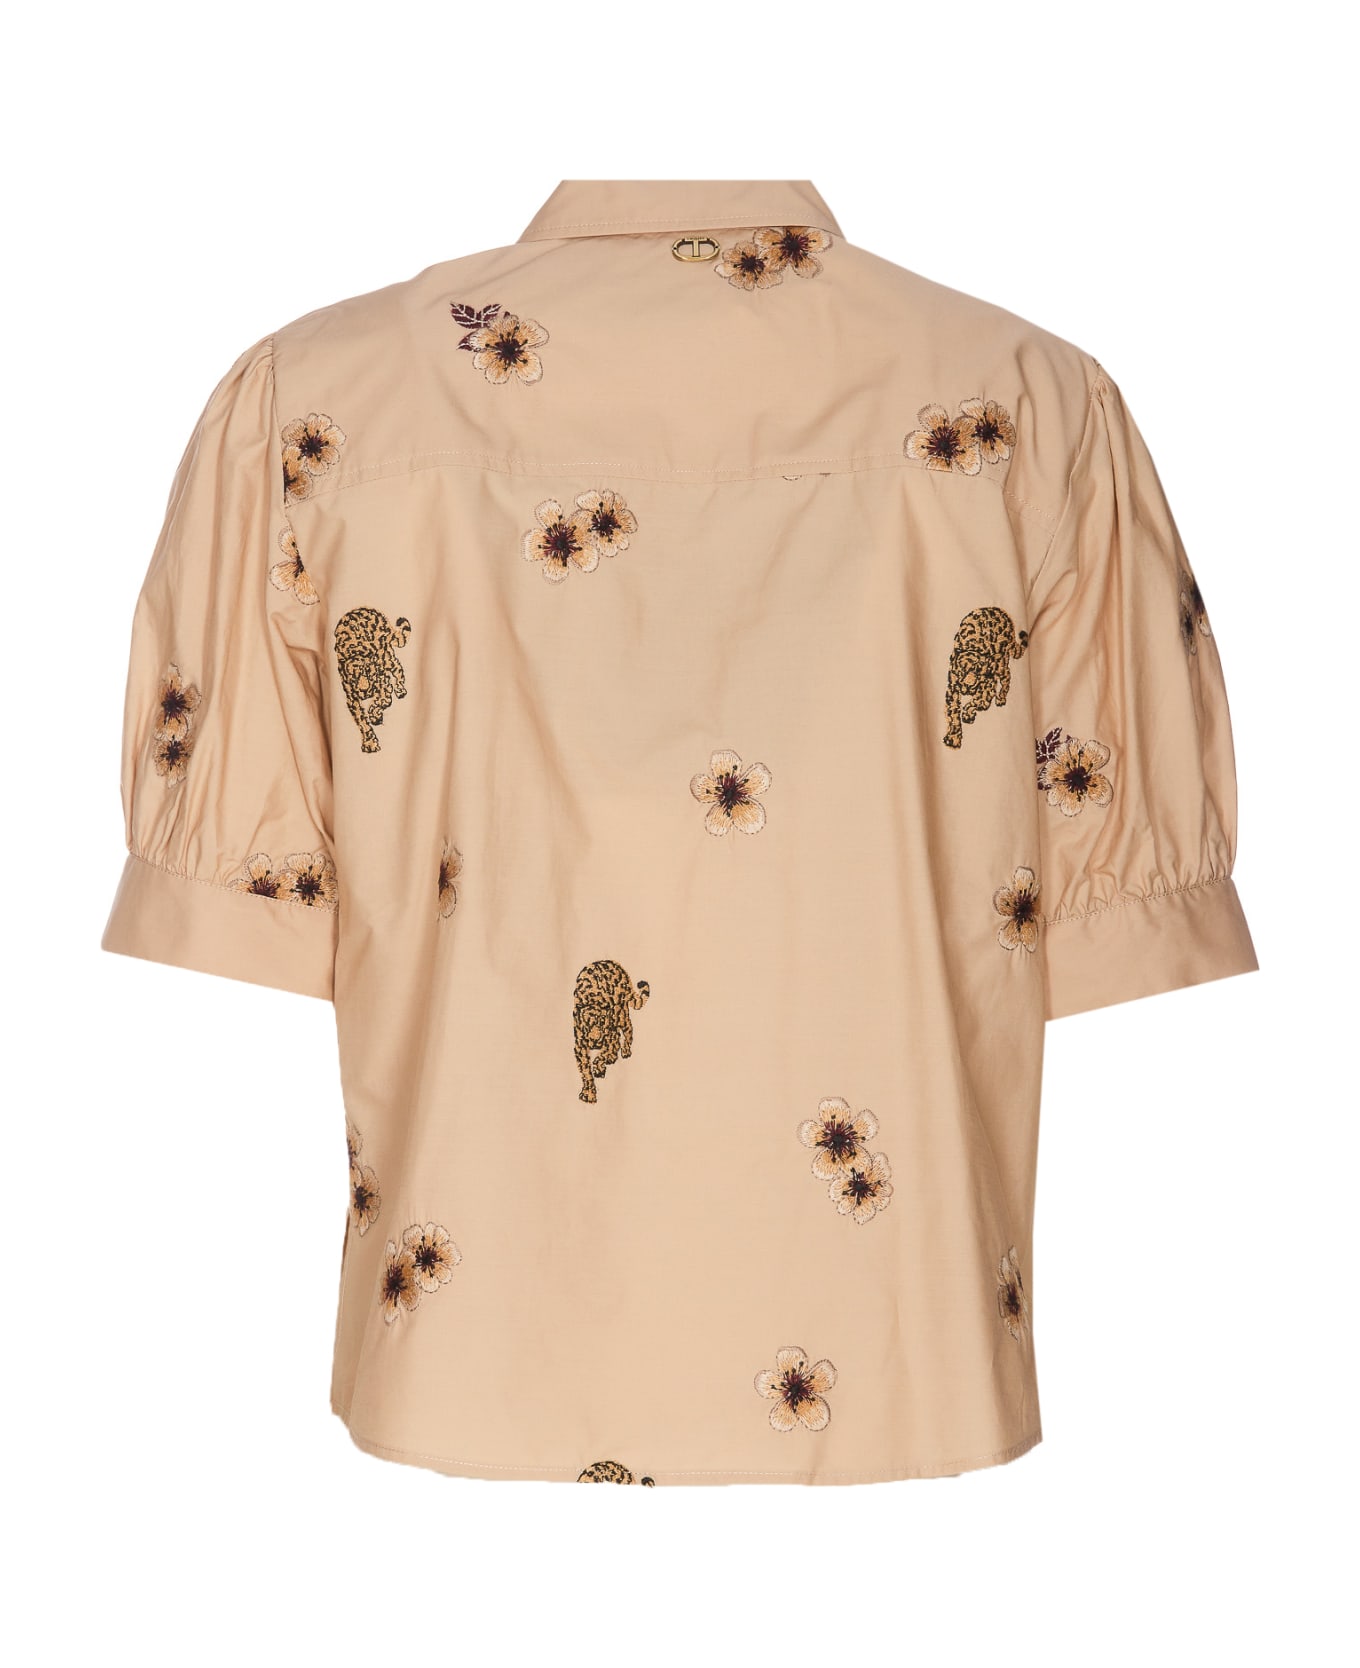 TwinSet Popeline Embroidered Shirt - Beige シャツ